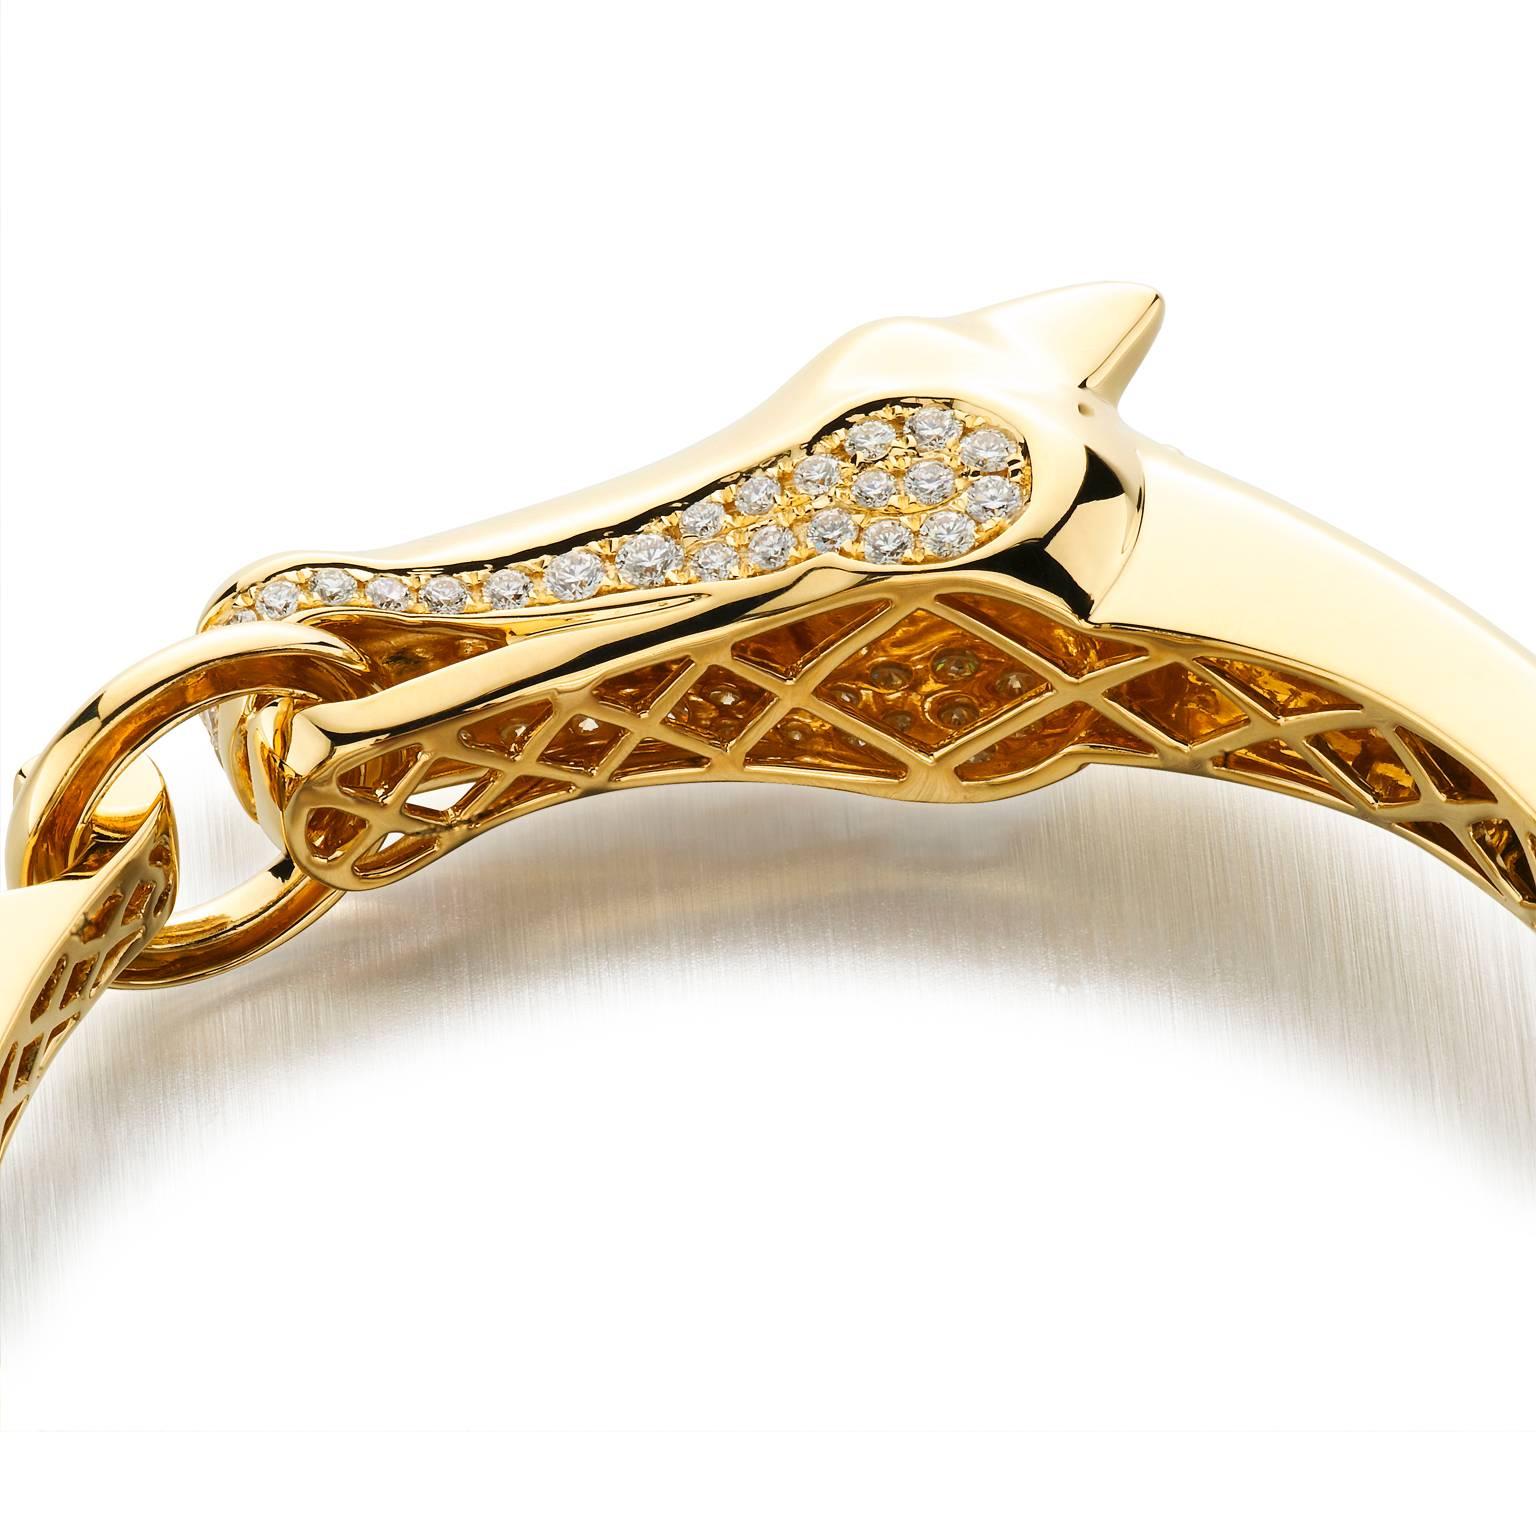 Sleek contemporary designed, heavy 18k yellow gold hinged bracelet. Features a double sided single horse head that curves around the wrist and closes with the horse head clasping a bit in it’s mouth. Accented with 2.60 cttw pave set diamonds.